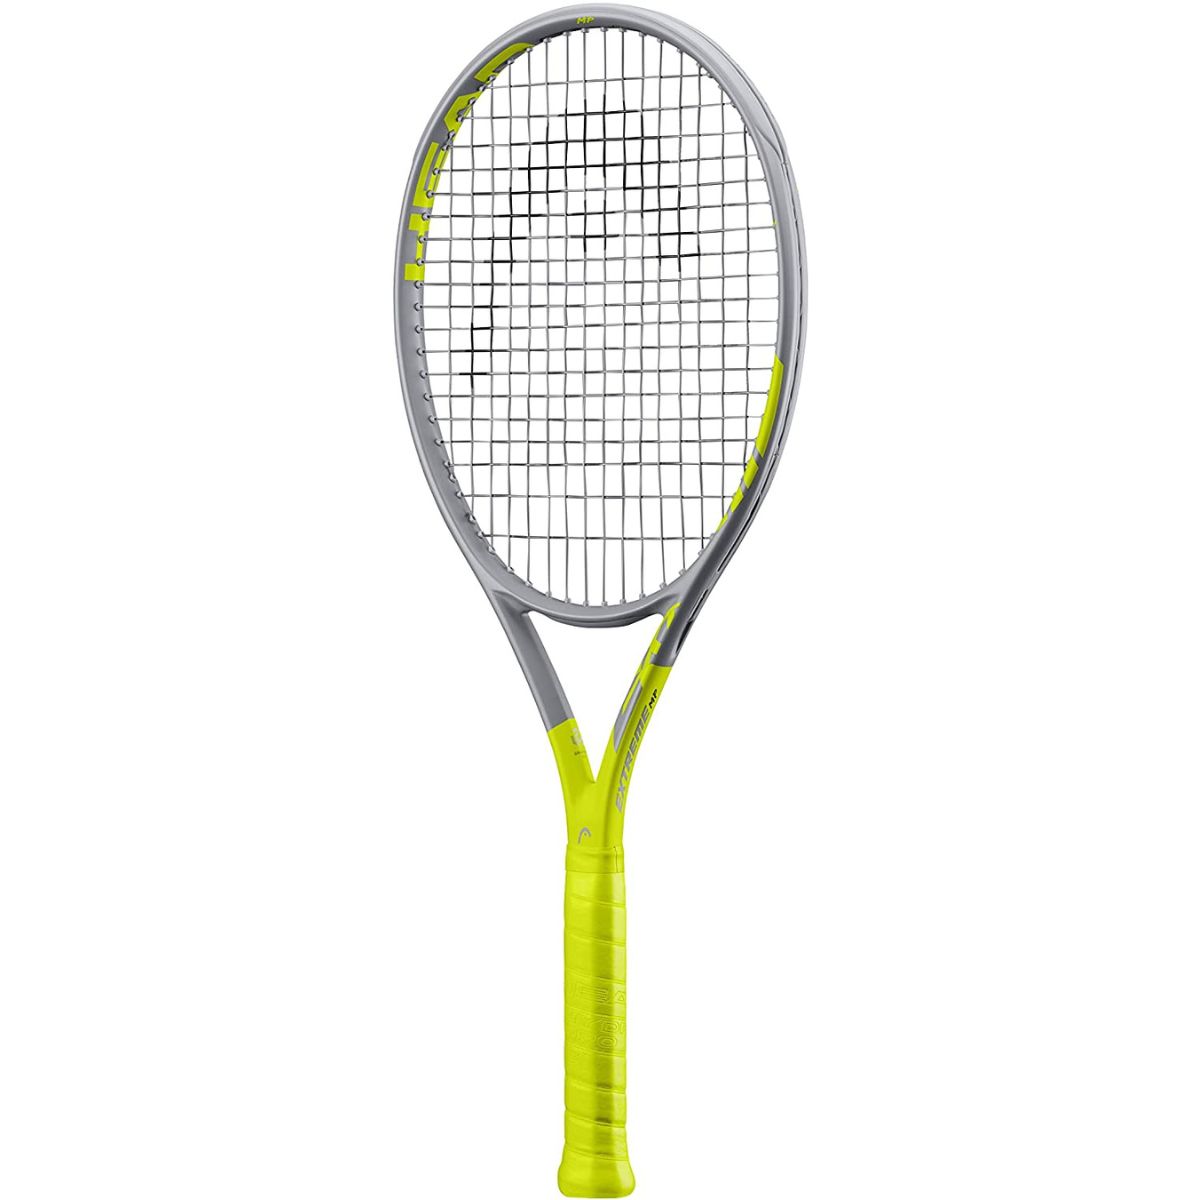 The Best Tennis Rackets for Doubles Options: HEAD Graphene 360+ Extreme MP